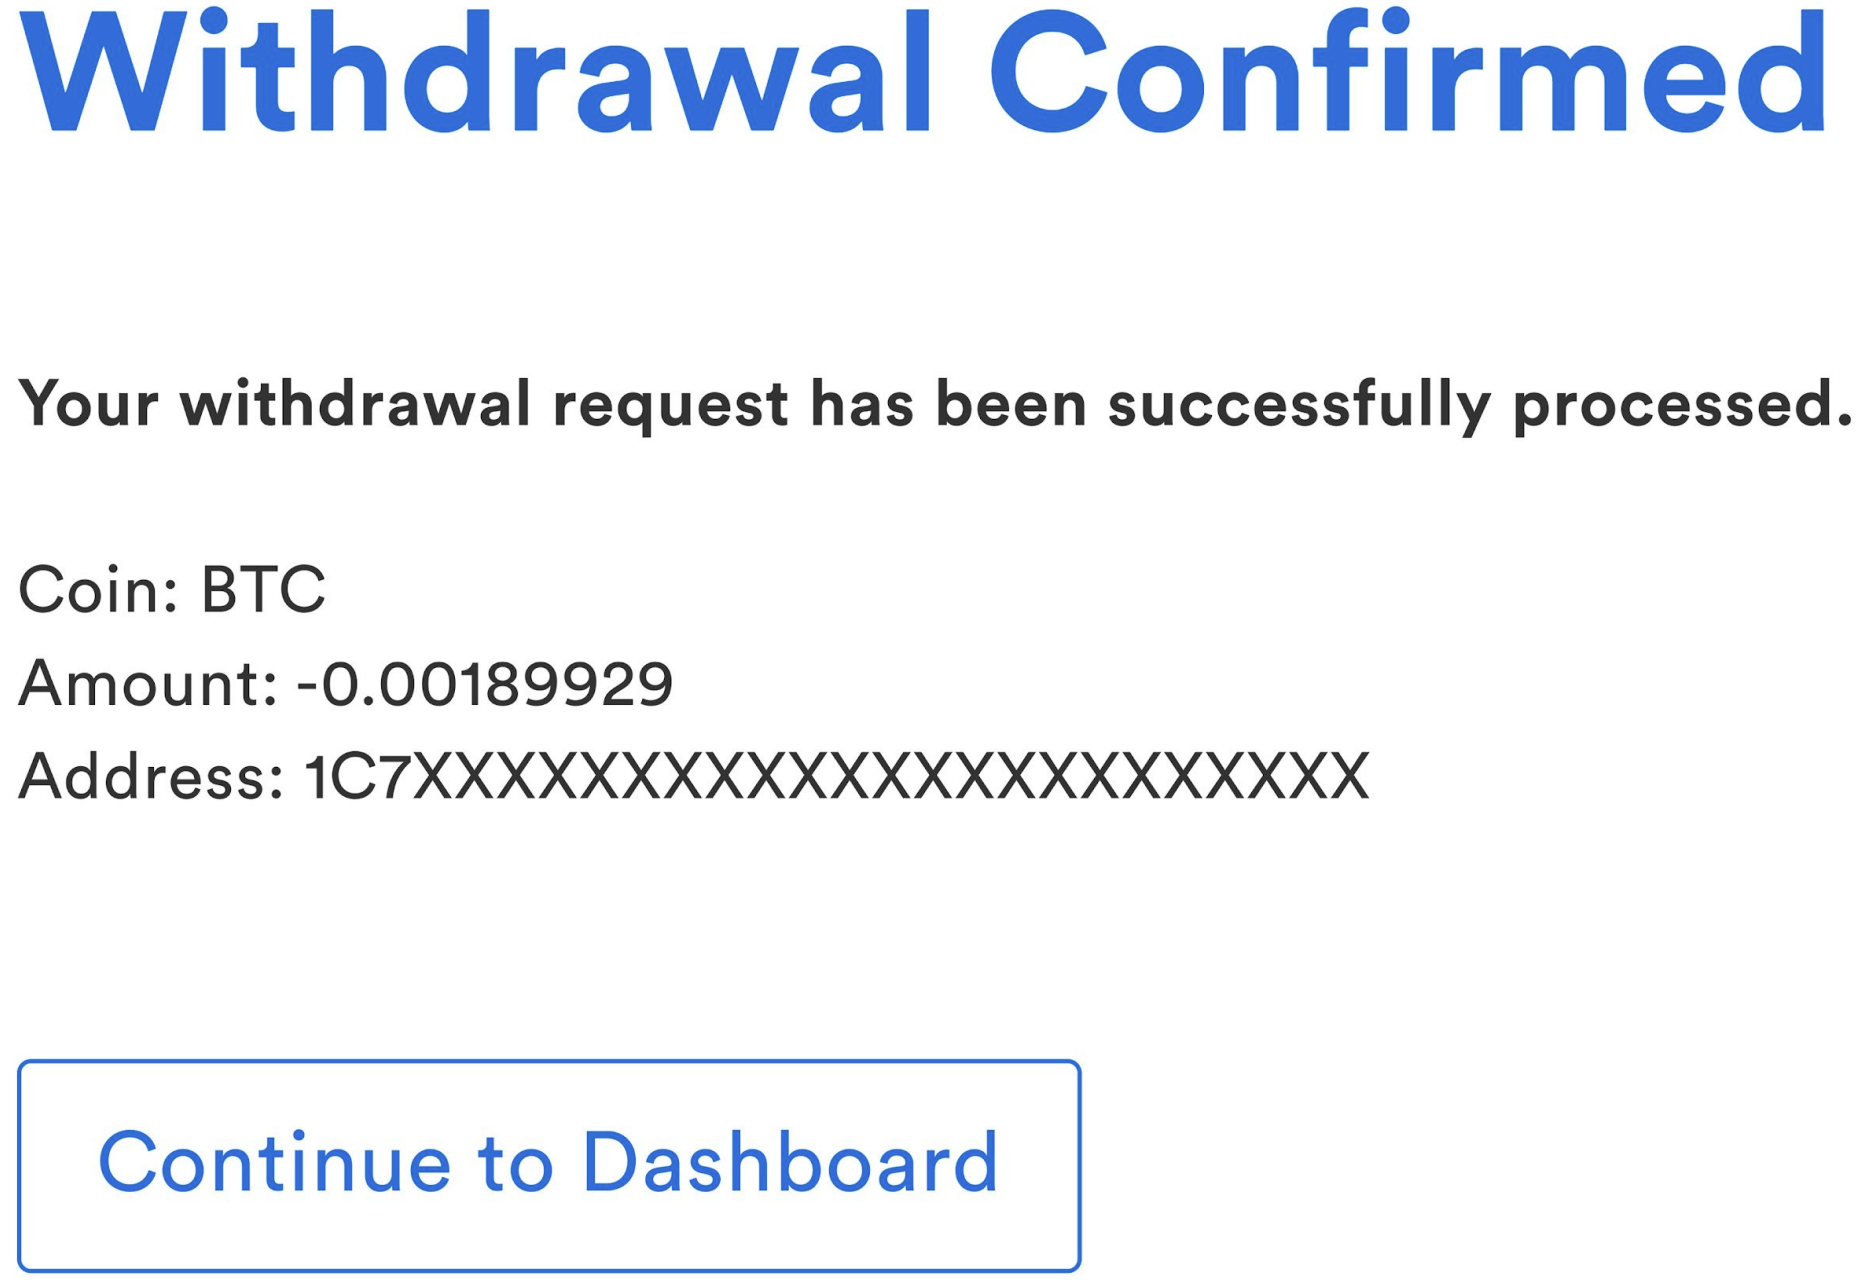 CoinSpot_BTC_Send_-_Withdrawal_Confirmed.png